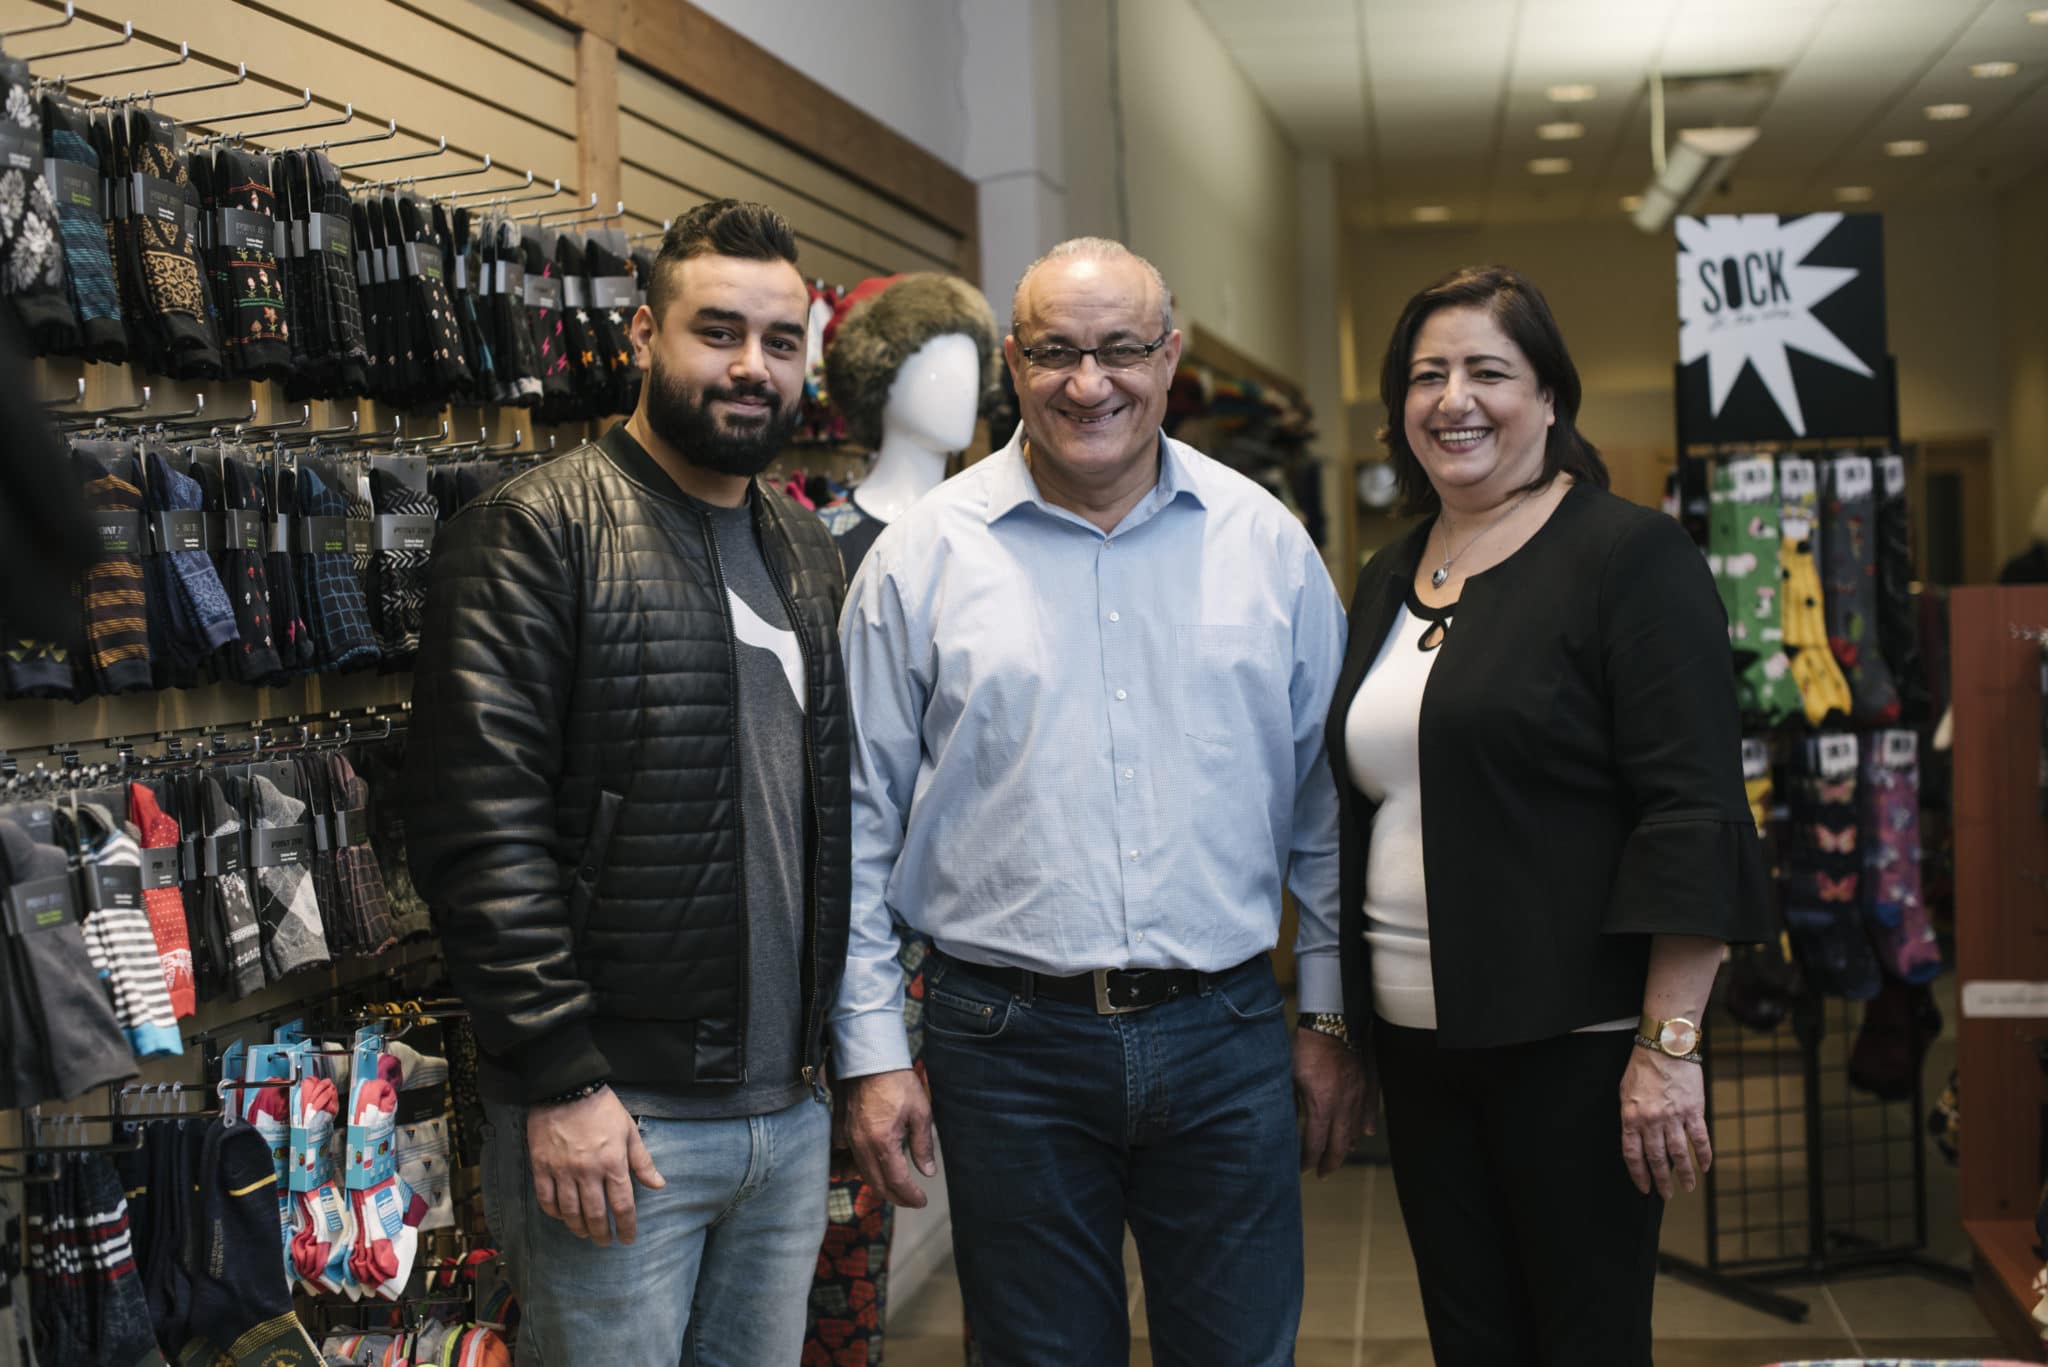 A refugee family from Syria stands in their store in Guelph